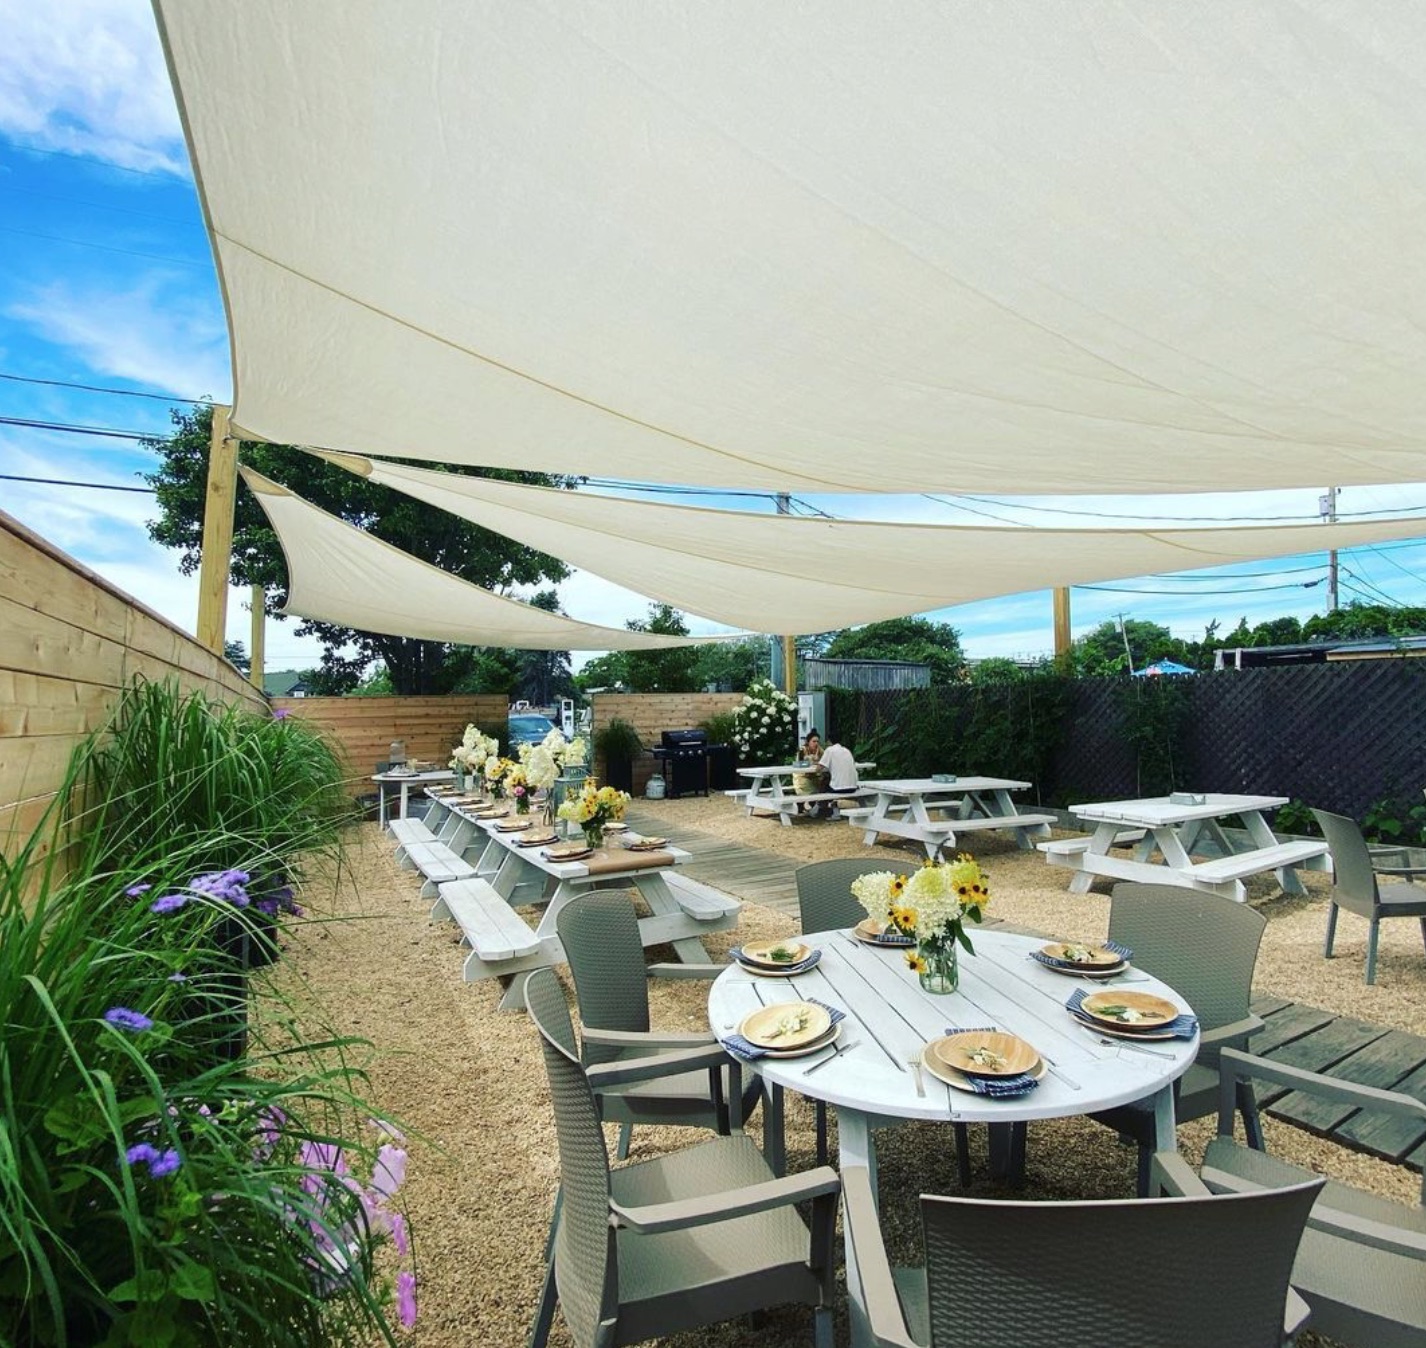 The lovely backyard space where Naturally Good Cafe's new dinner series takes place every Tuesday night all summer in Montauk